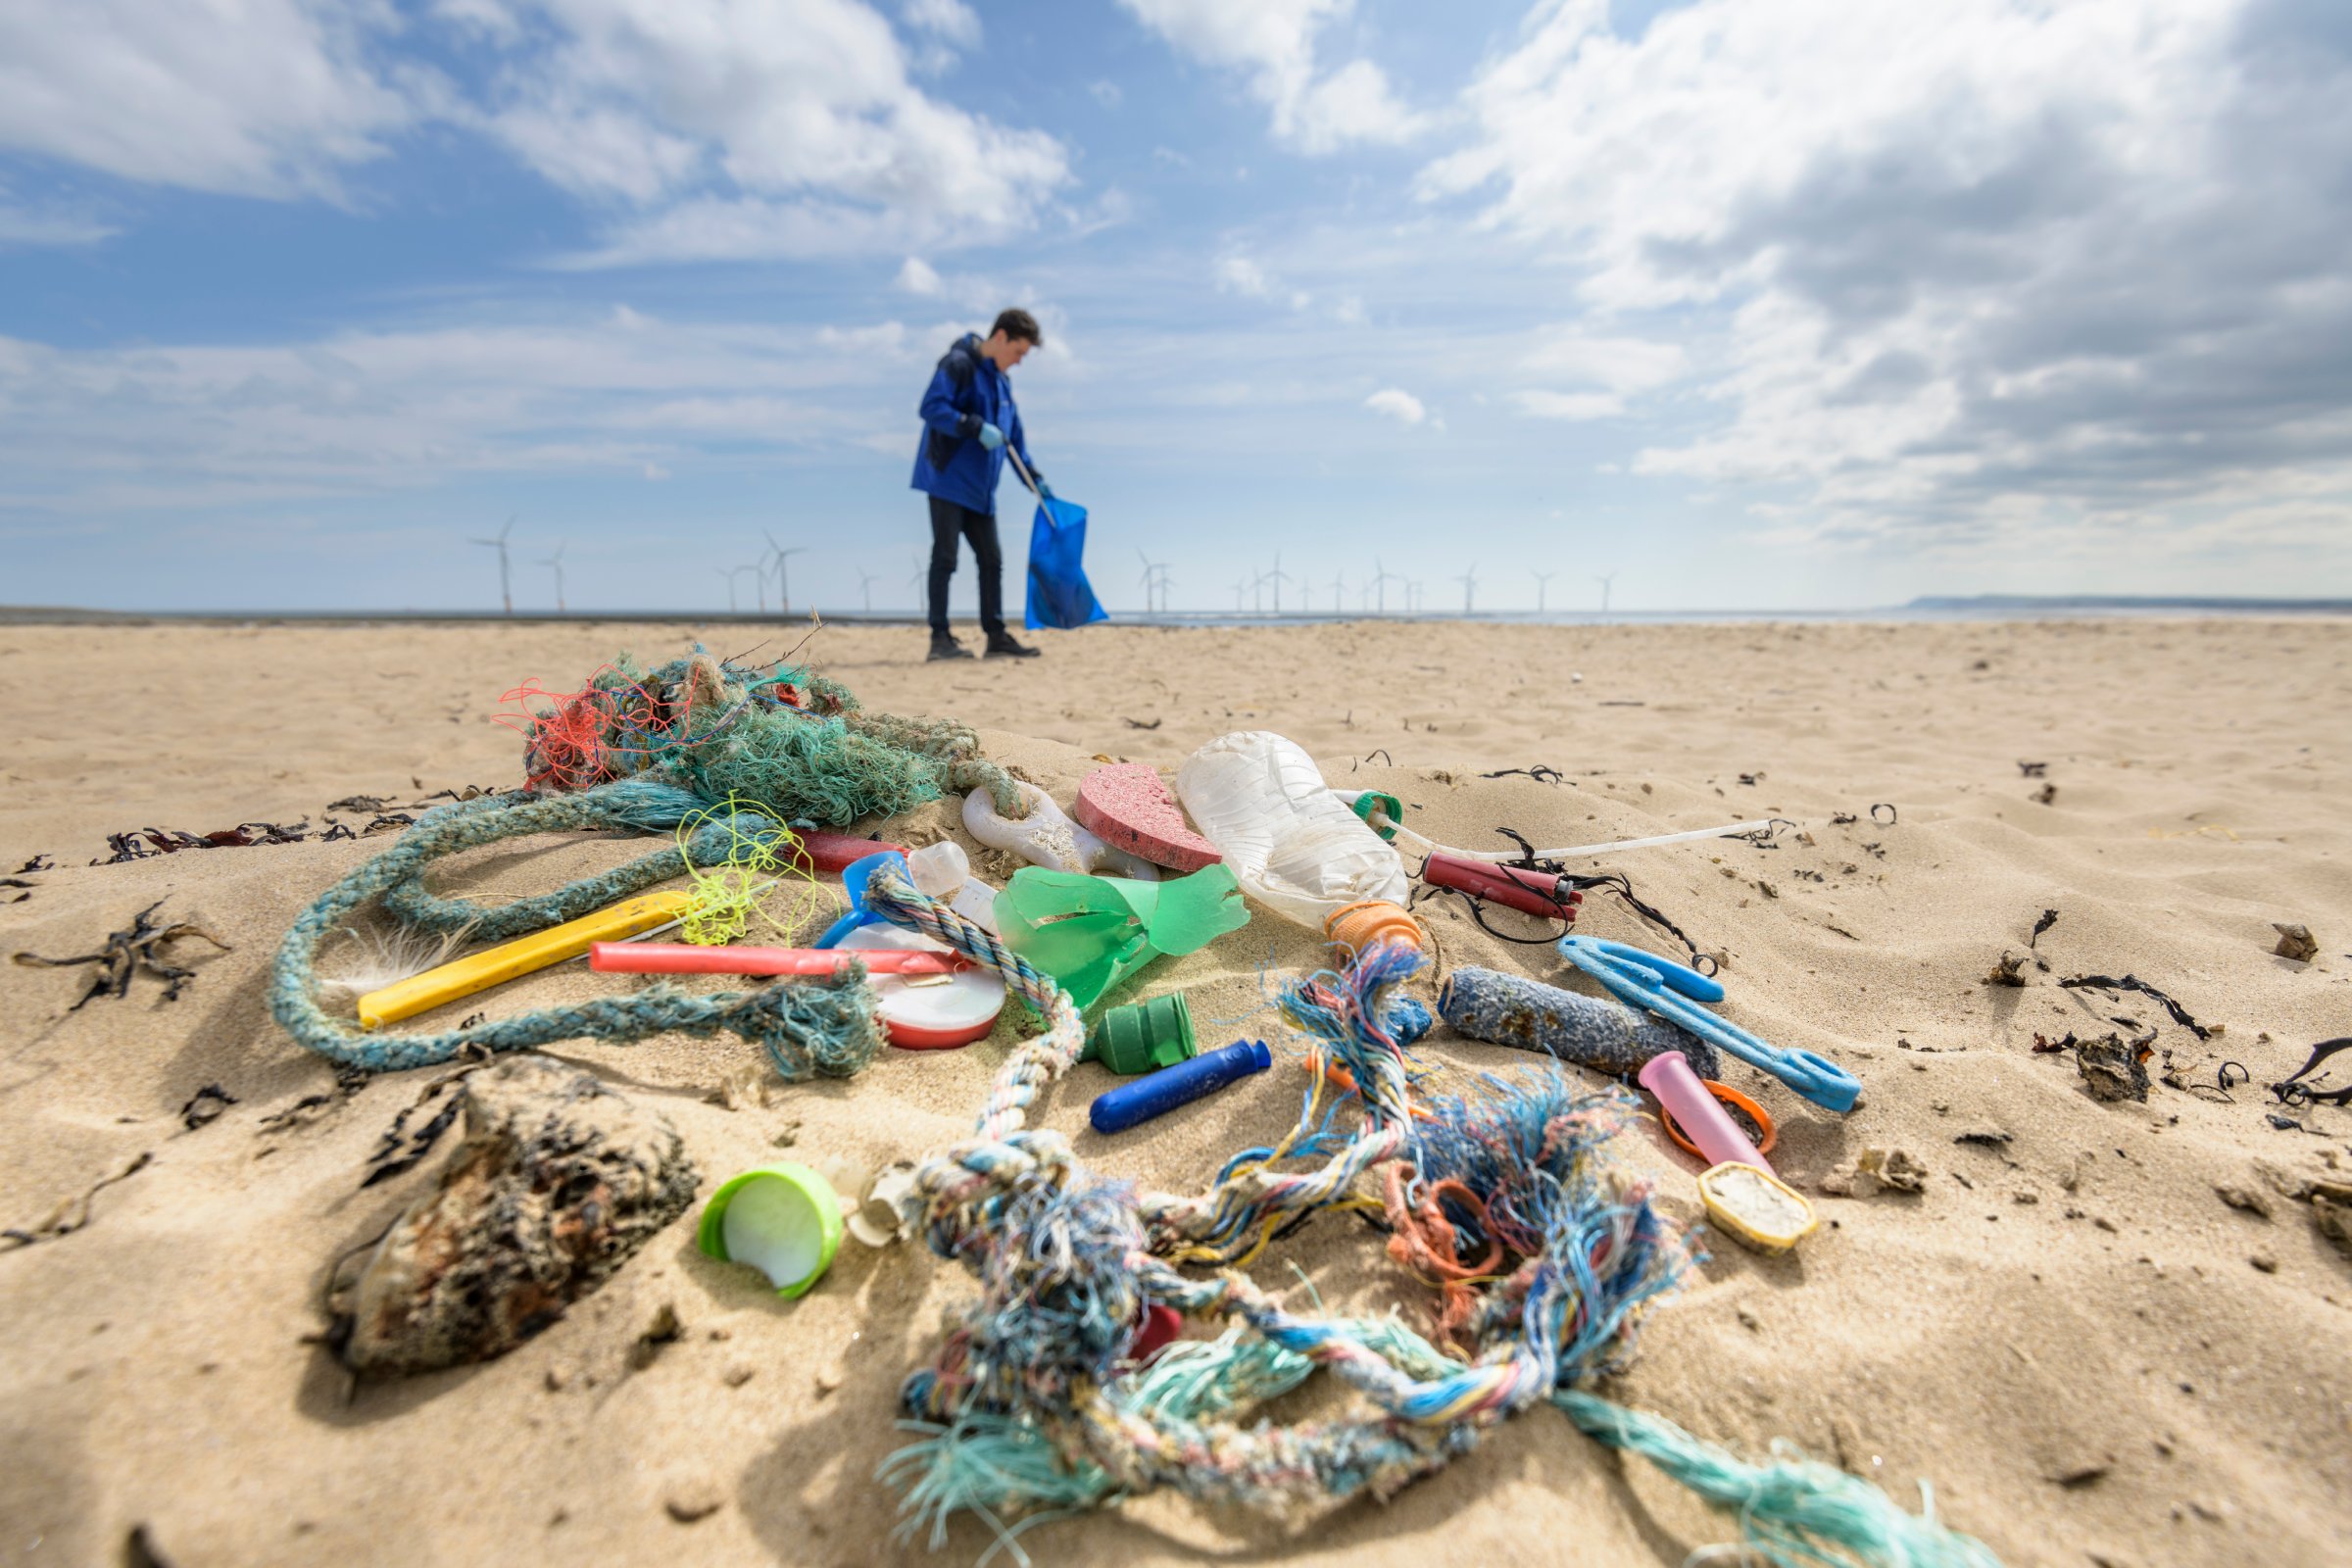 Man picking up plastic pollution collected on beach, North East England, UK